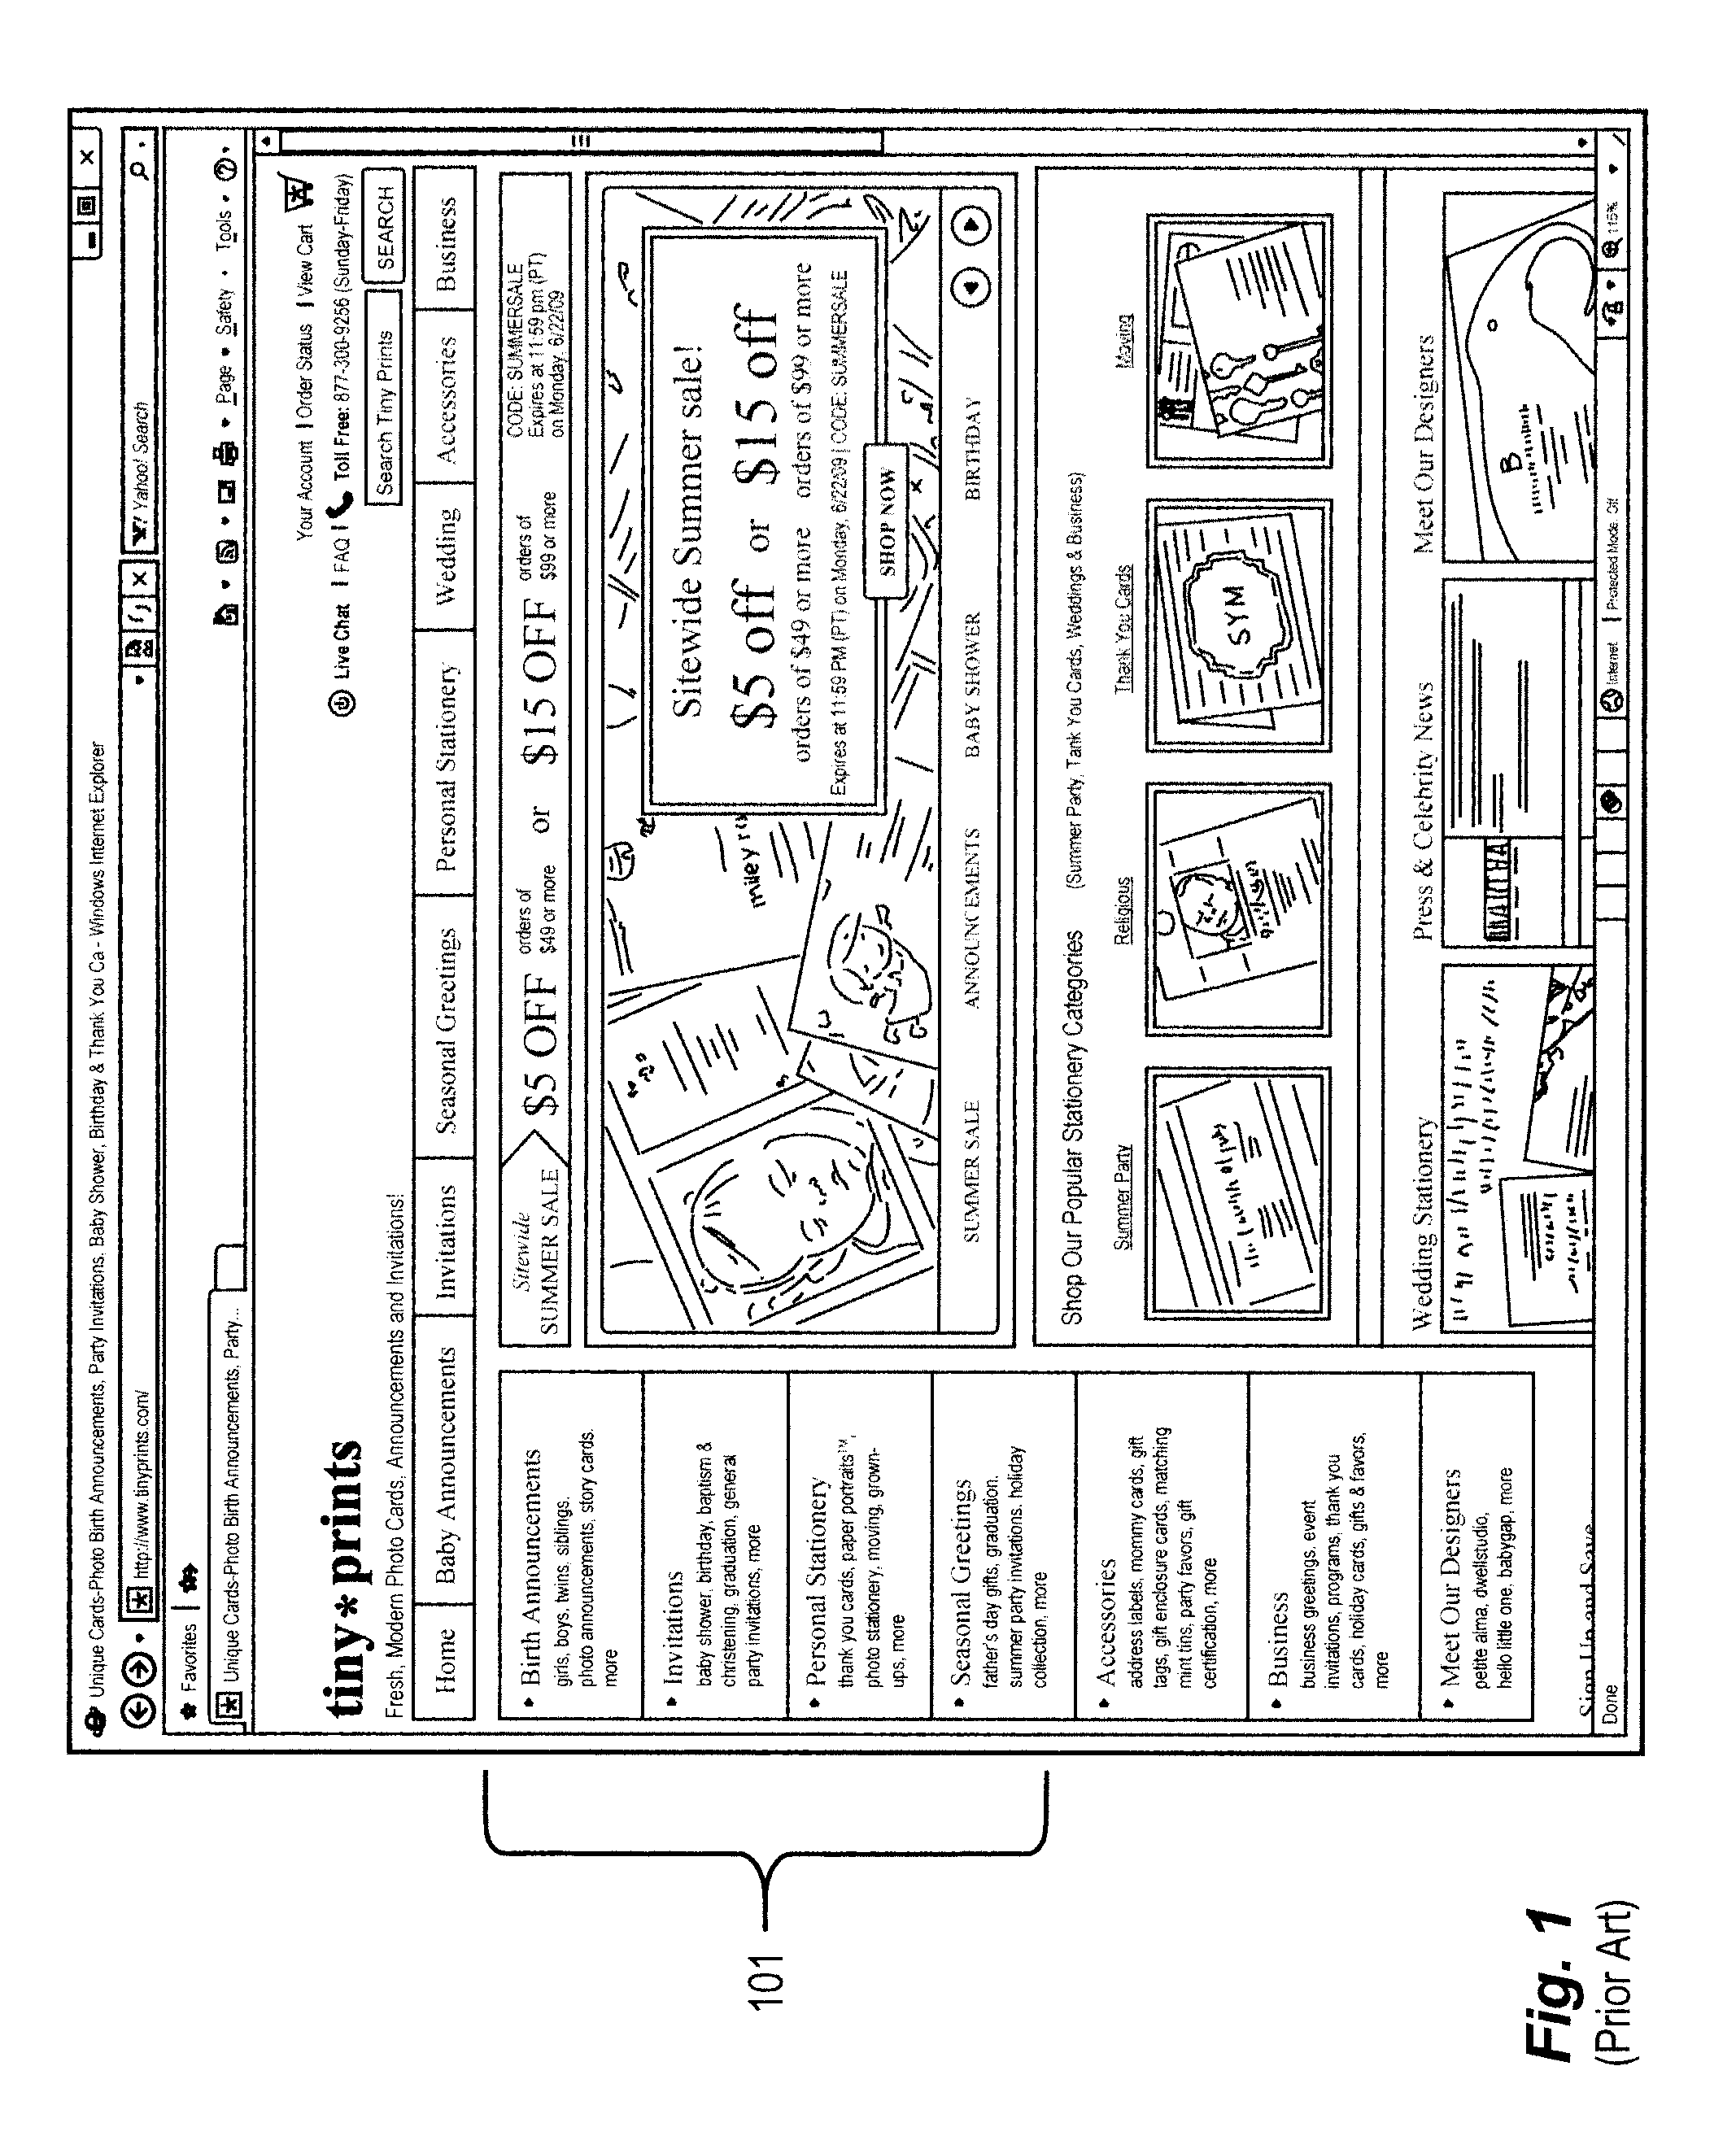 System and method for collecting end user feedback for stationery designs